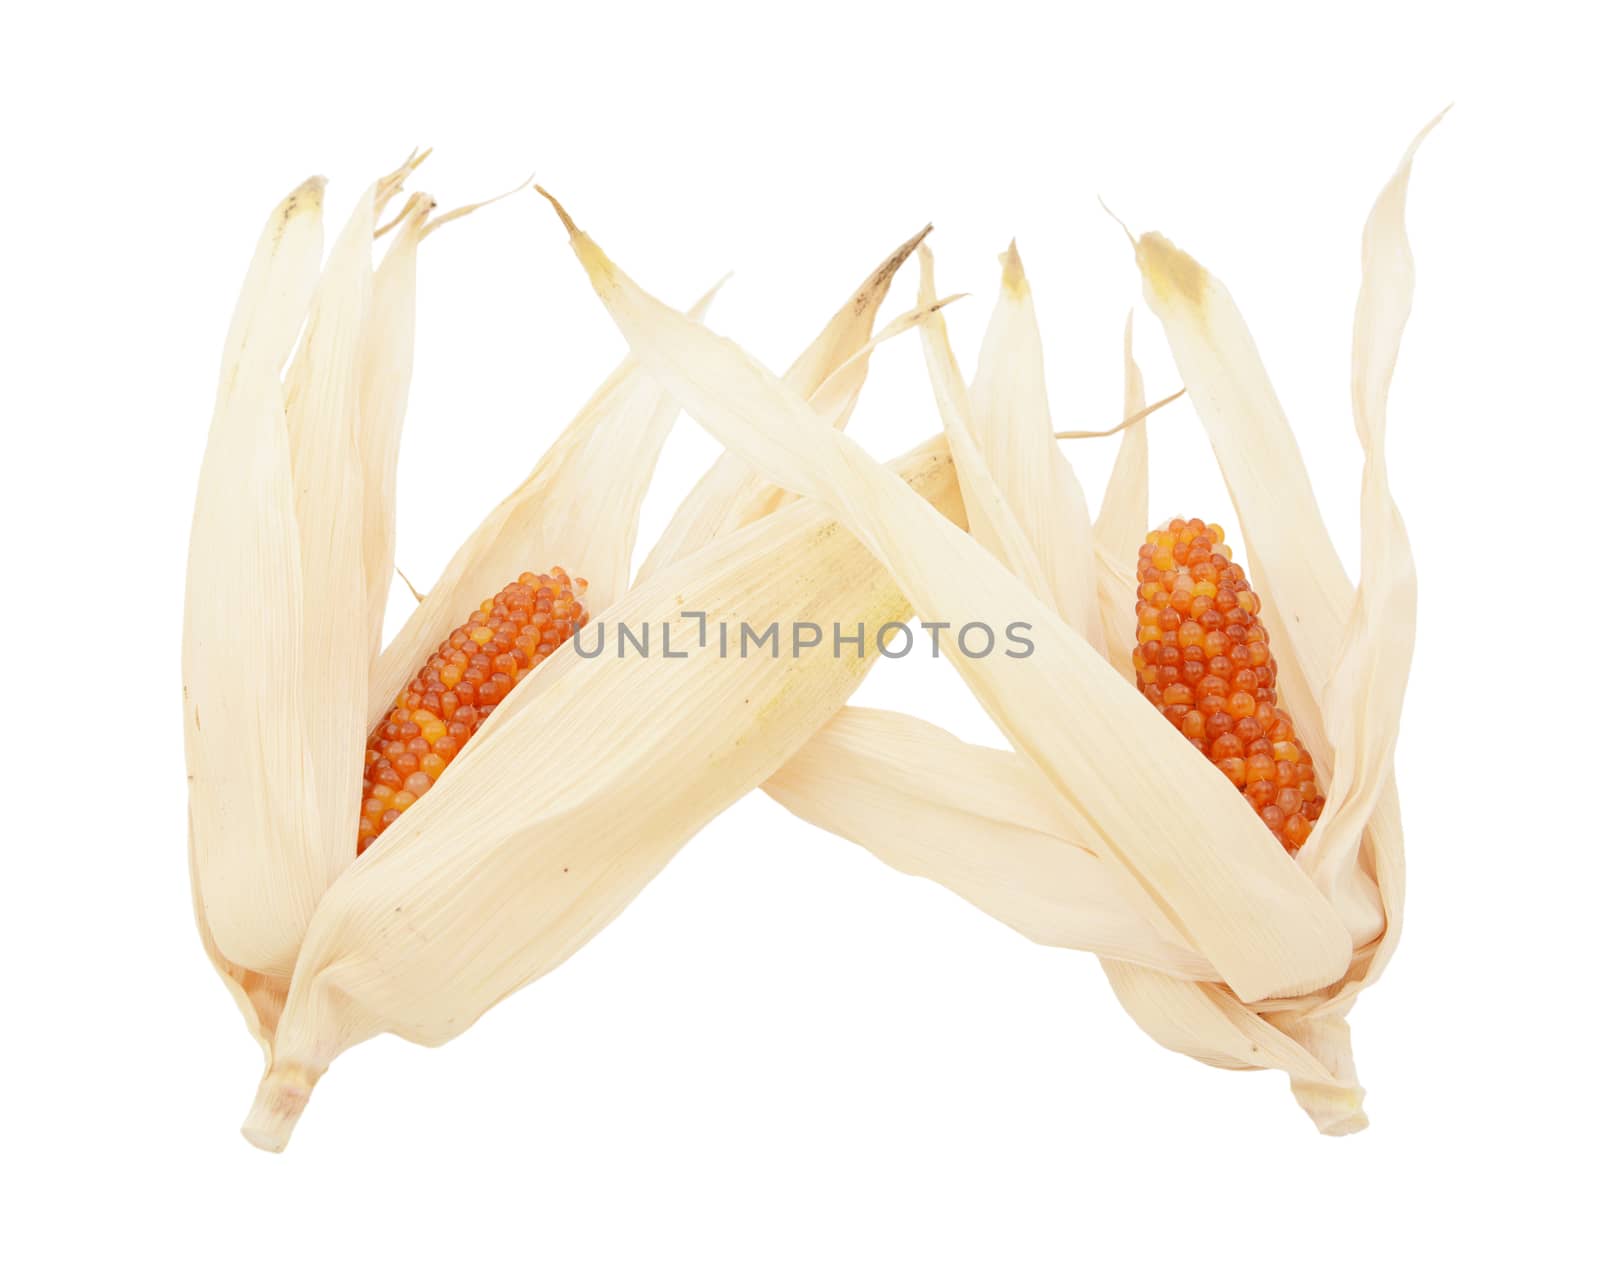 Two cobs of ornamental Indian corn with red niblets by sarahdoow